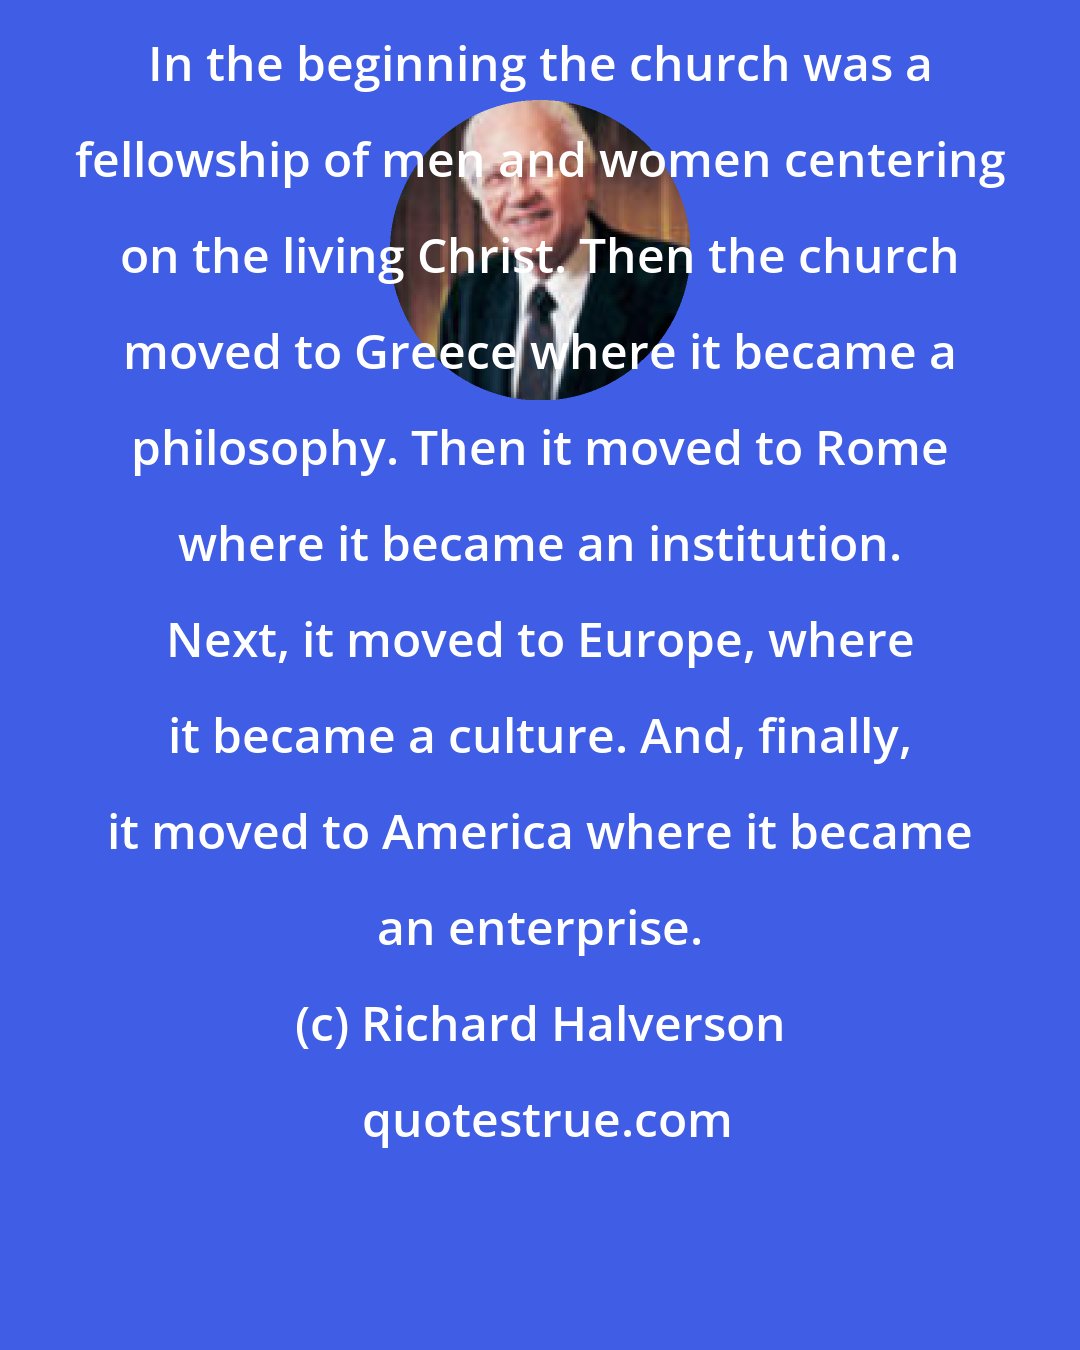 Richard Halverson: In the beginning the church was a fellowship of men and women centering on the living Christ. Then the church moved to Greece where it became a philosophy. Then it moved to Rome where it became an institution. Next, it moved to Europe, where it became a culture. And, finally, it moved to America where it became an enterprise.